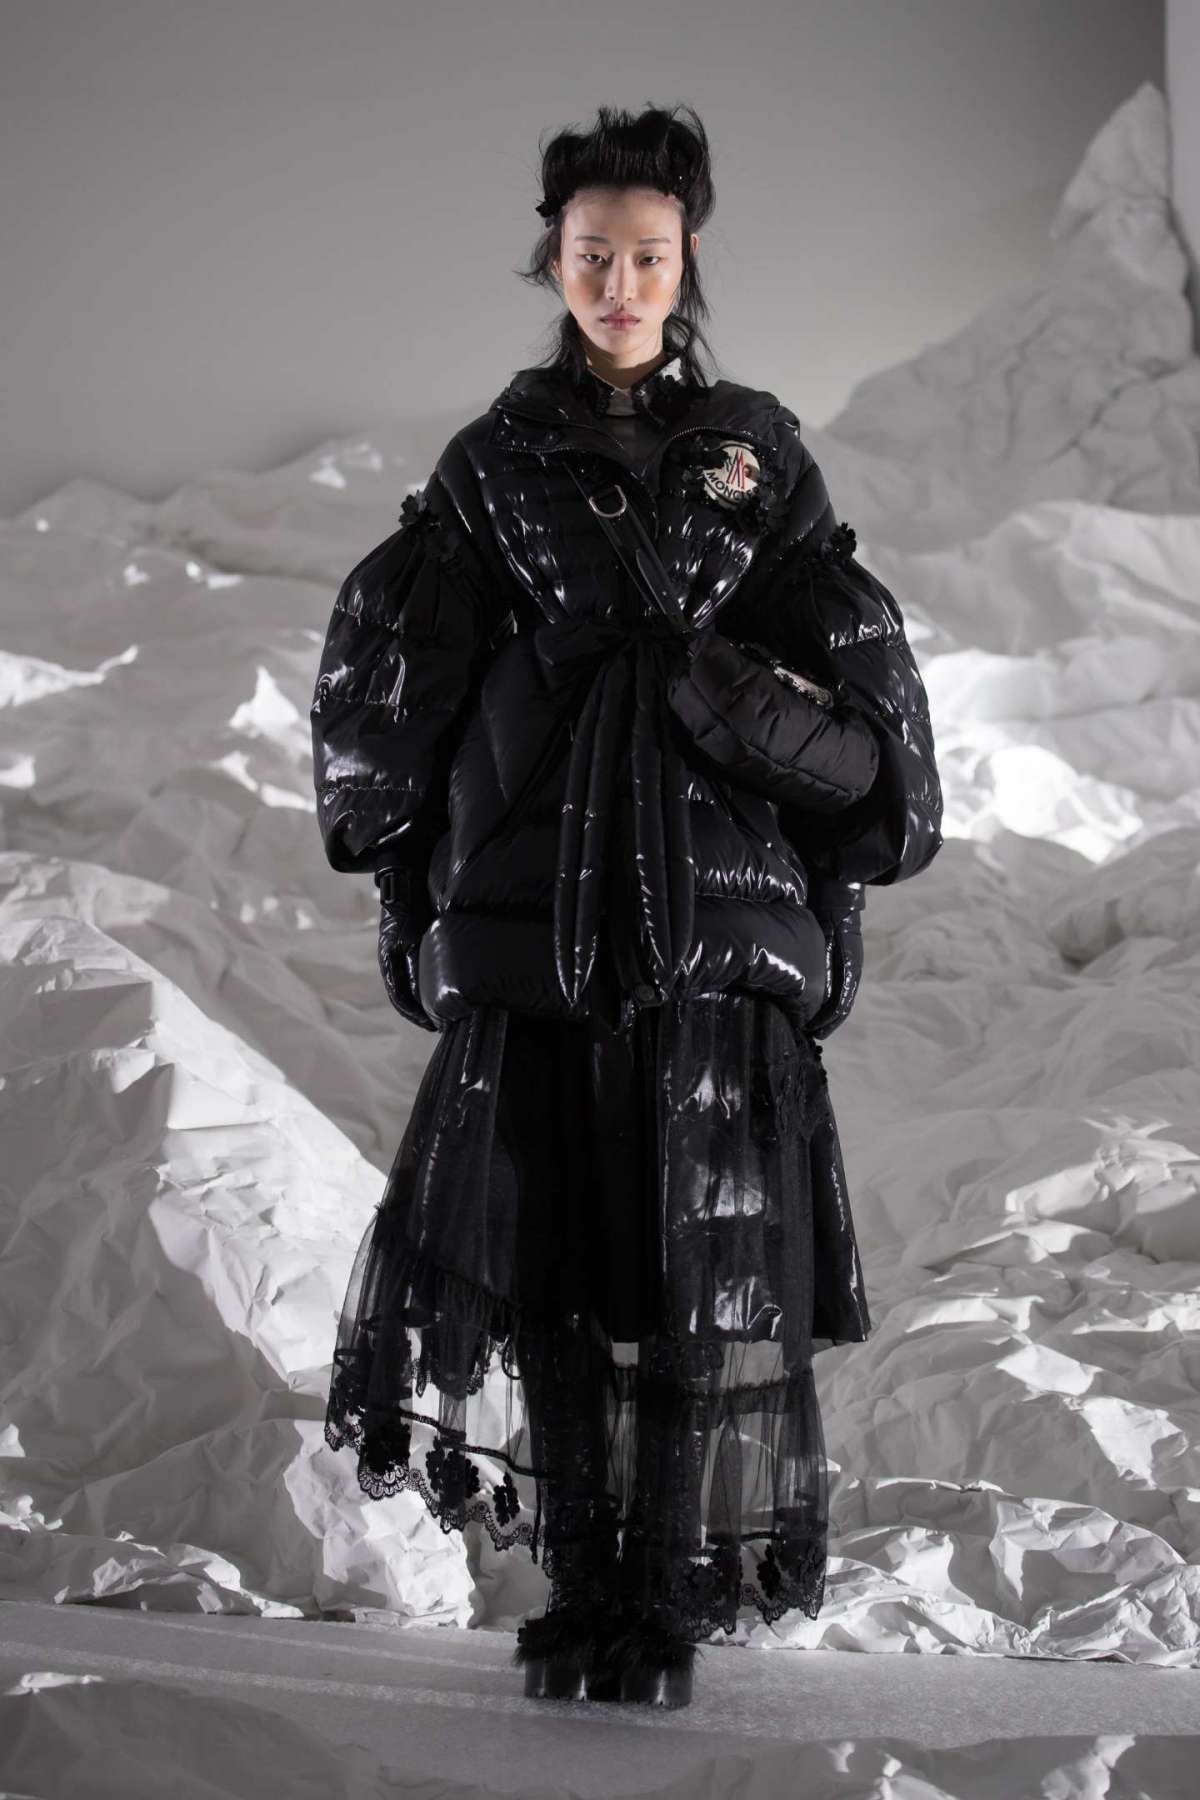 Look Moncler by Simone Rocha in total black